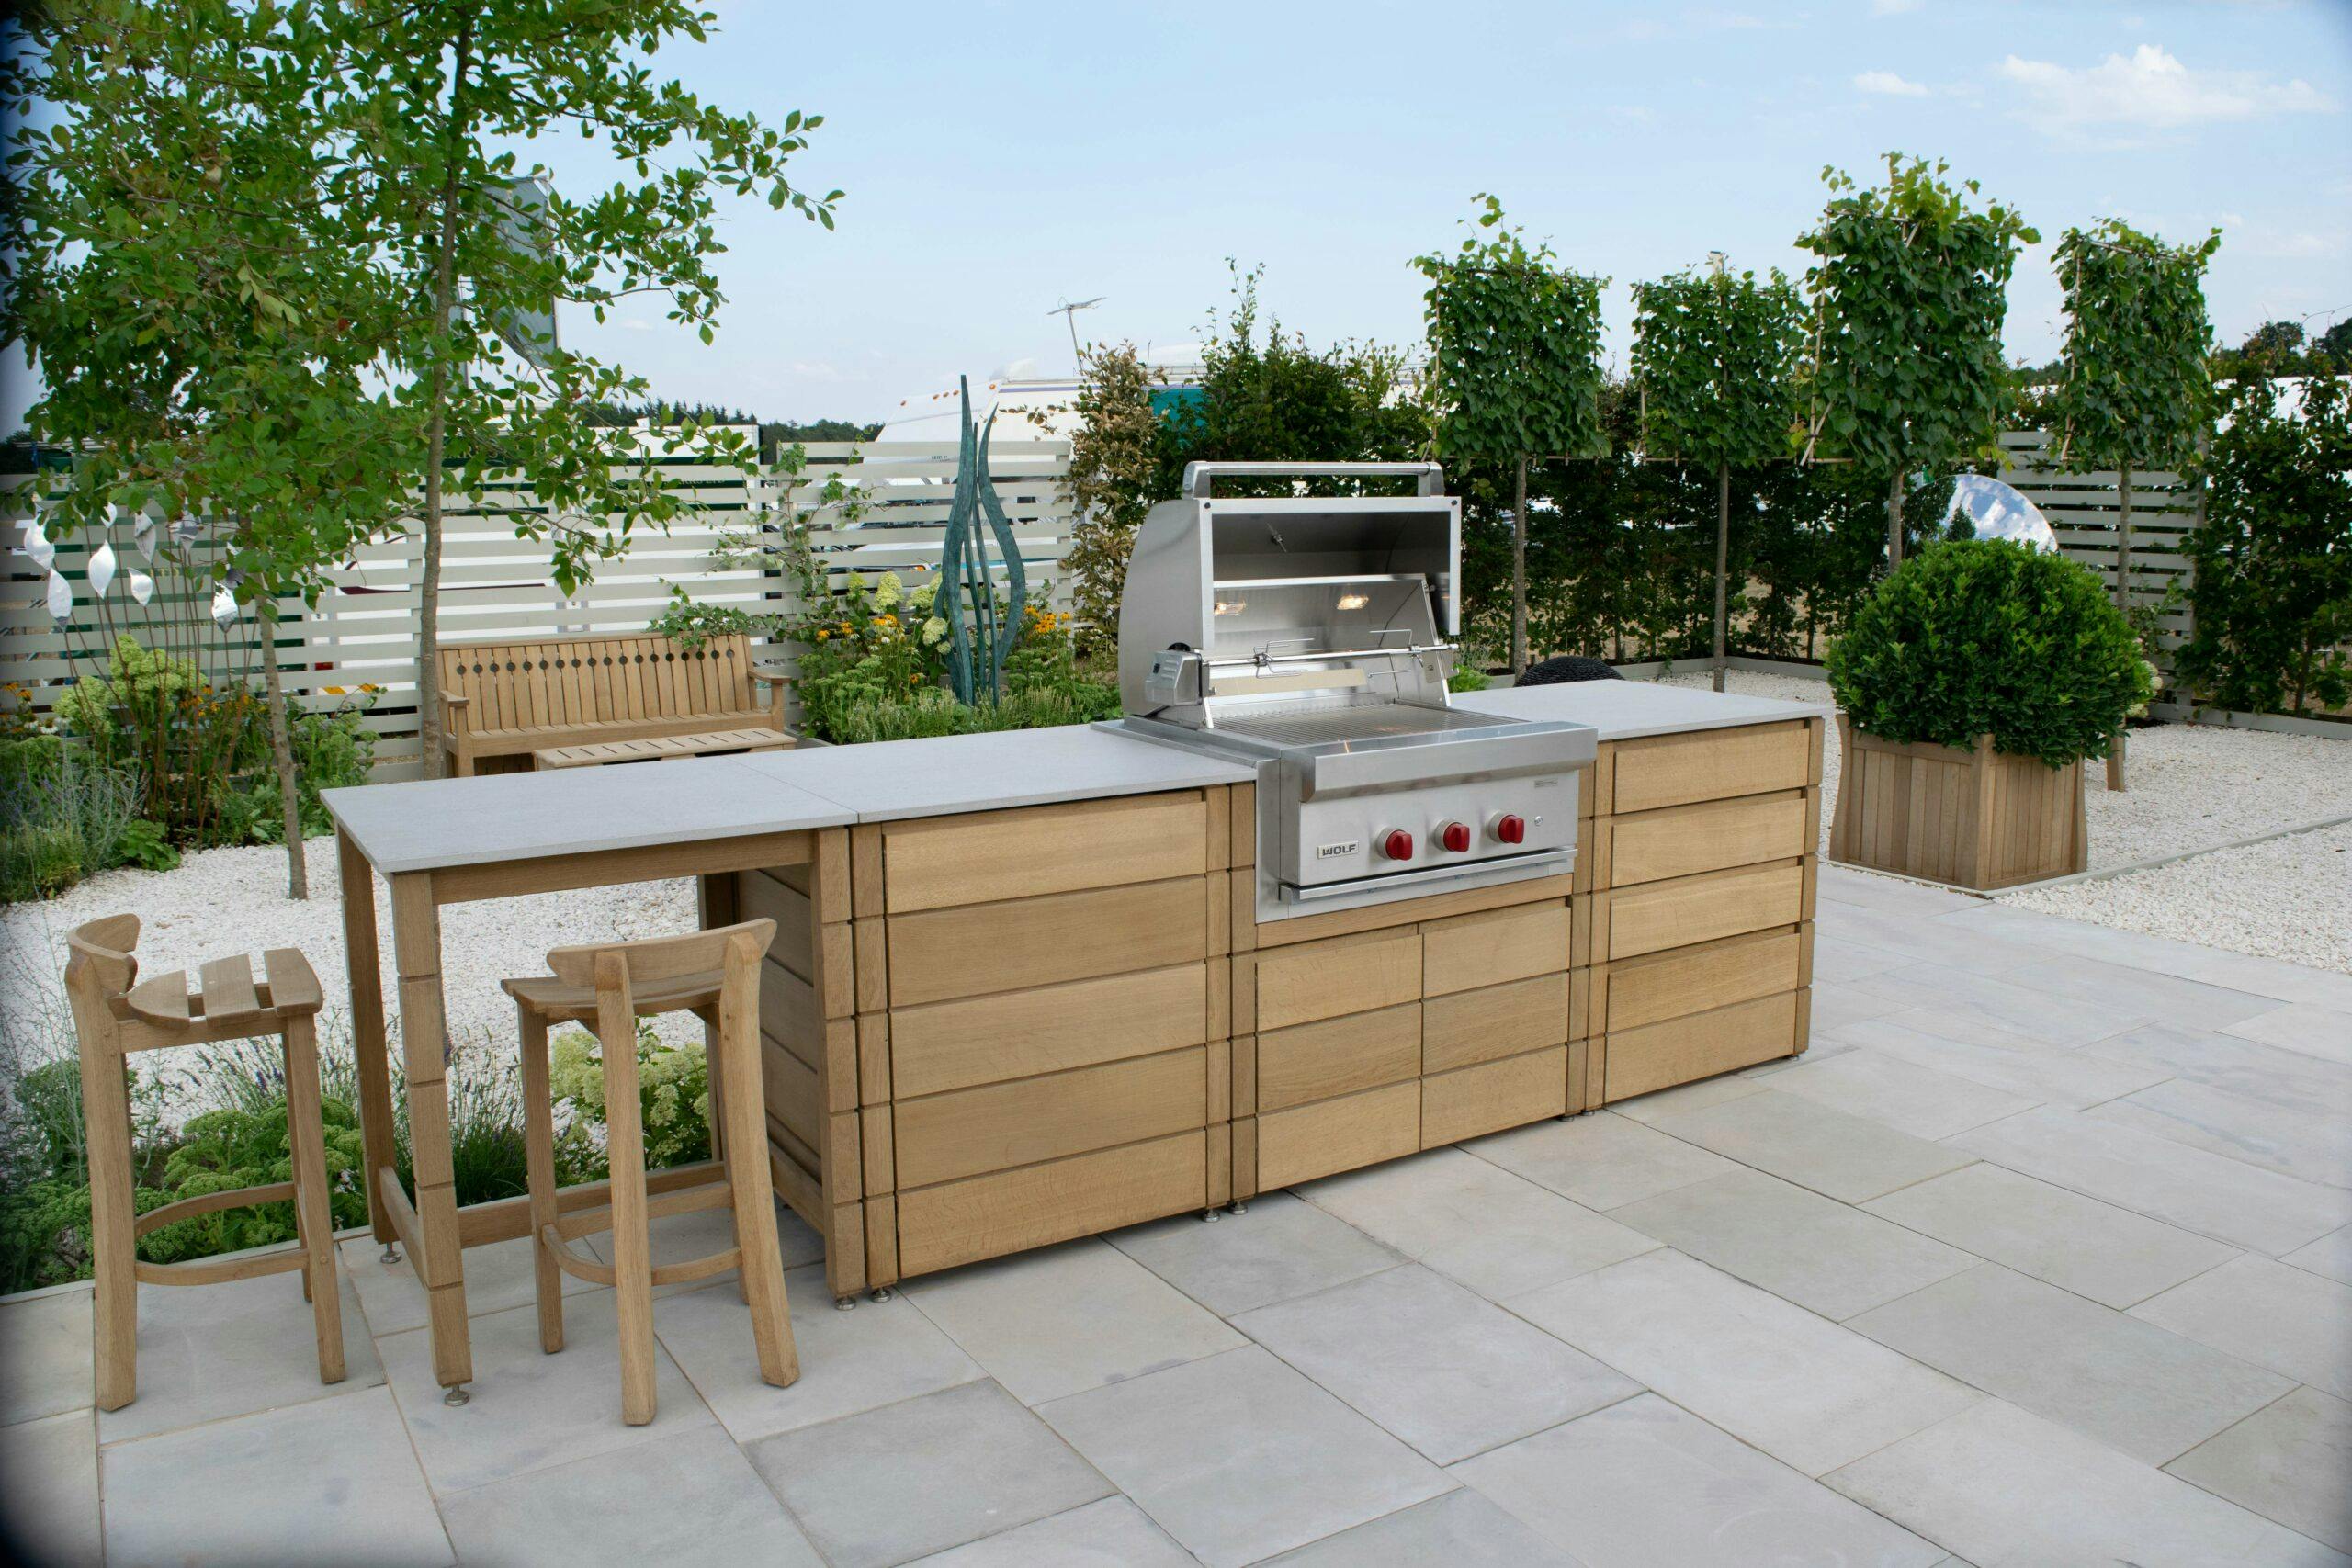 Planning a Modern Summer Kitchen: Outdoor Kitchen Cabinets, Countertops,  and More